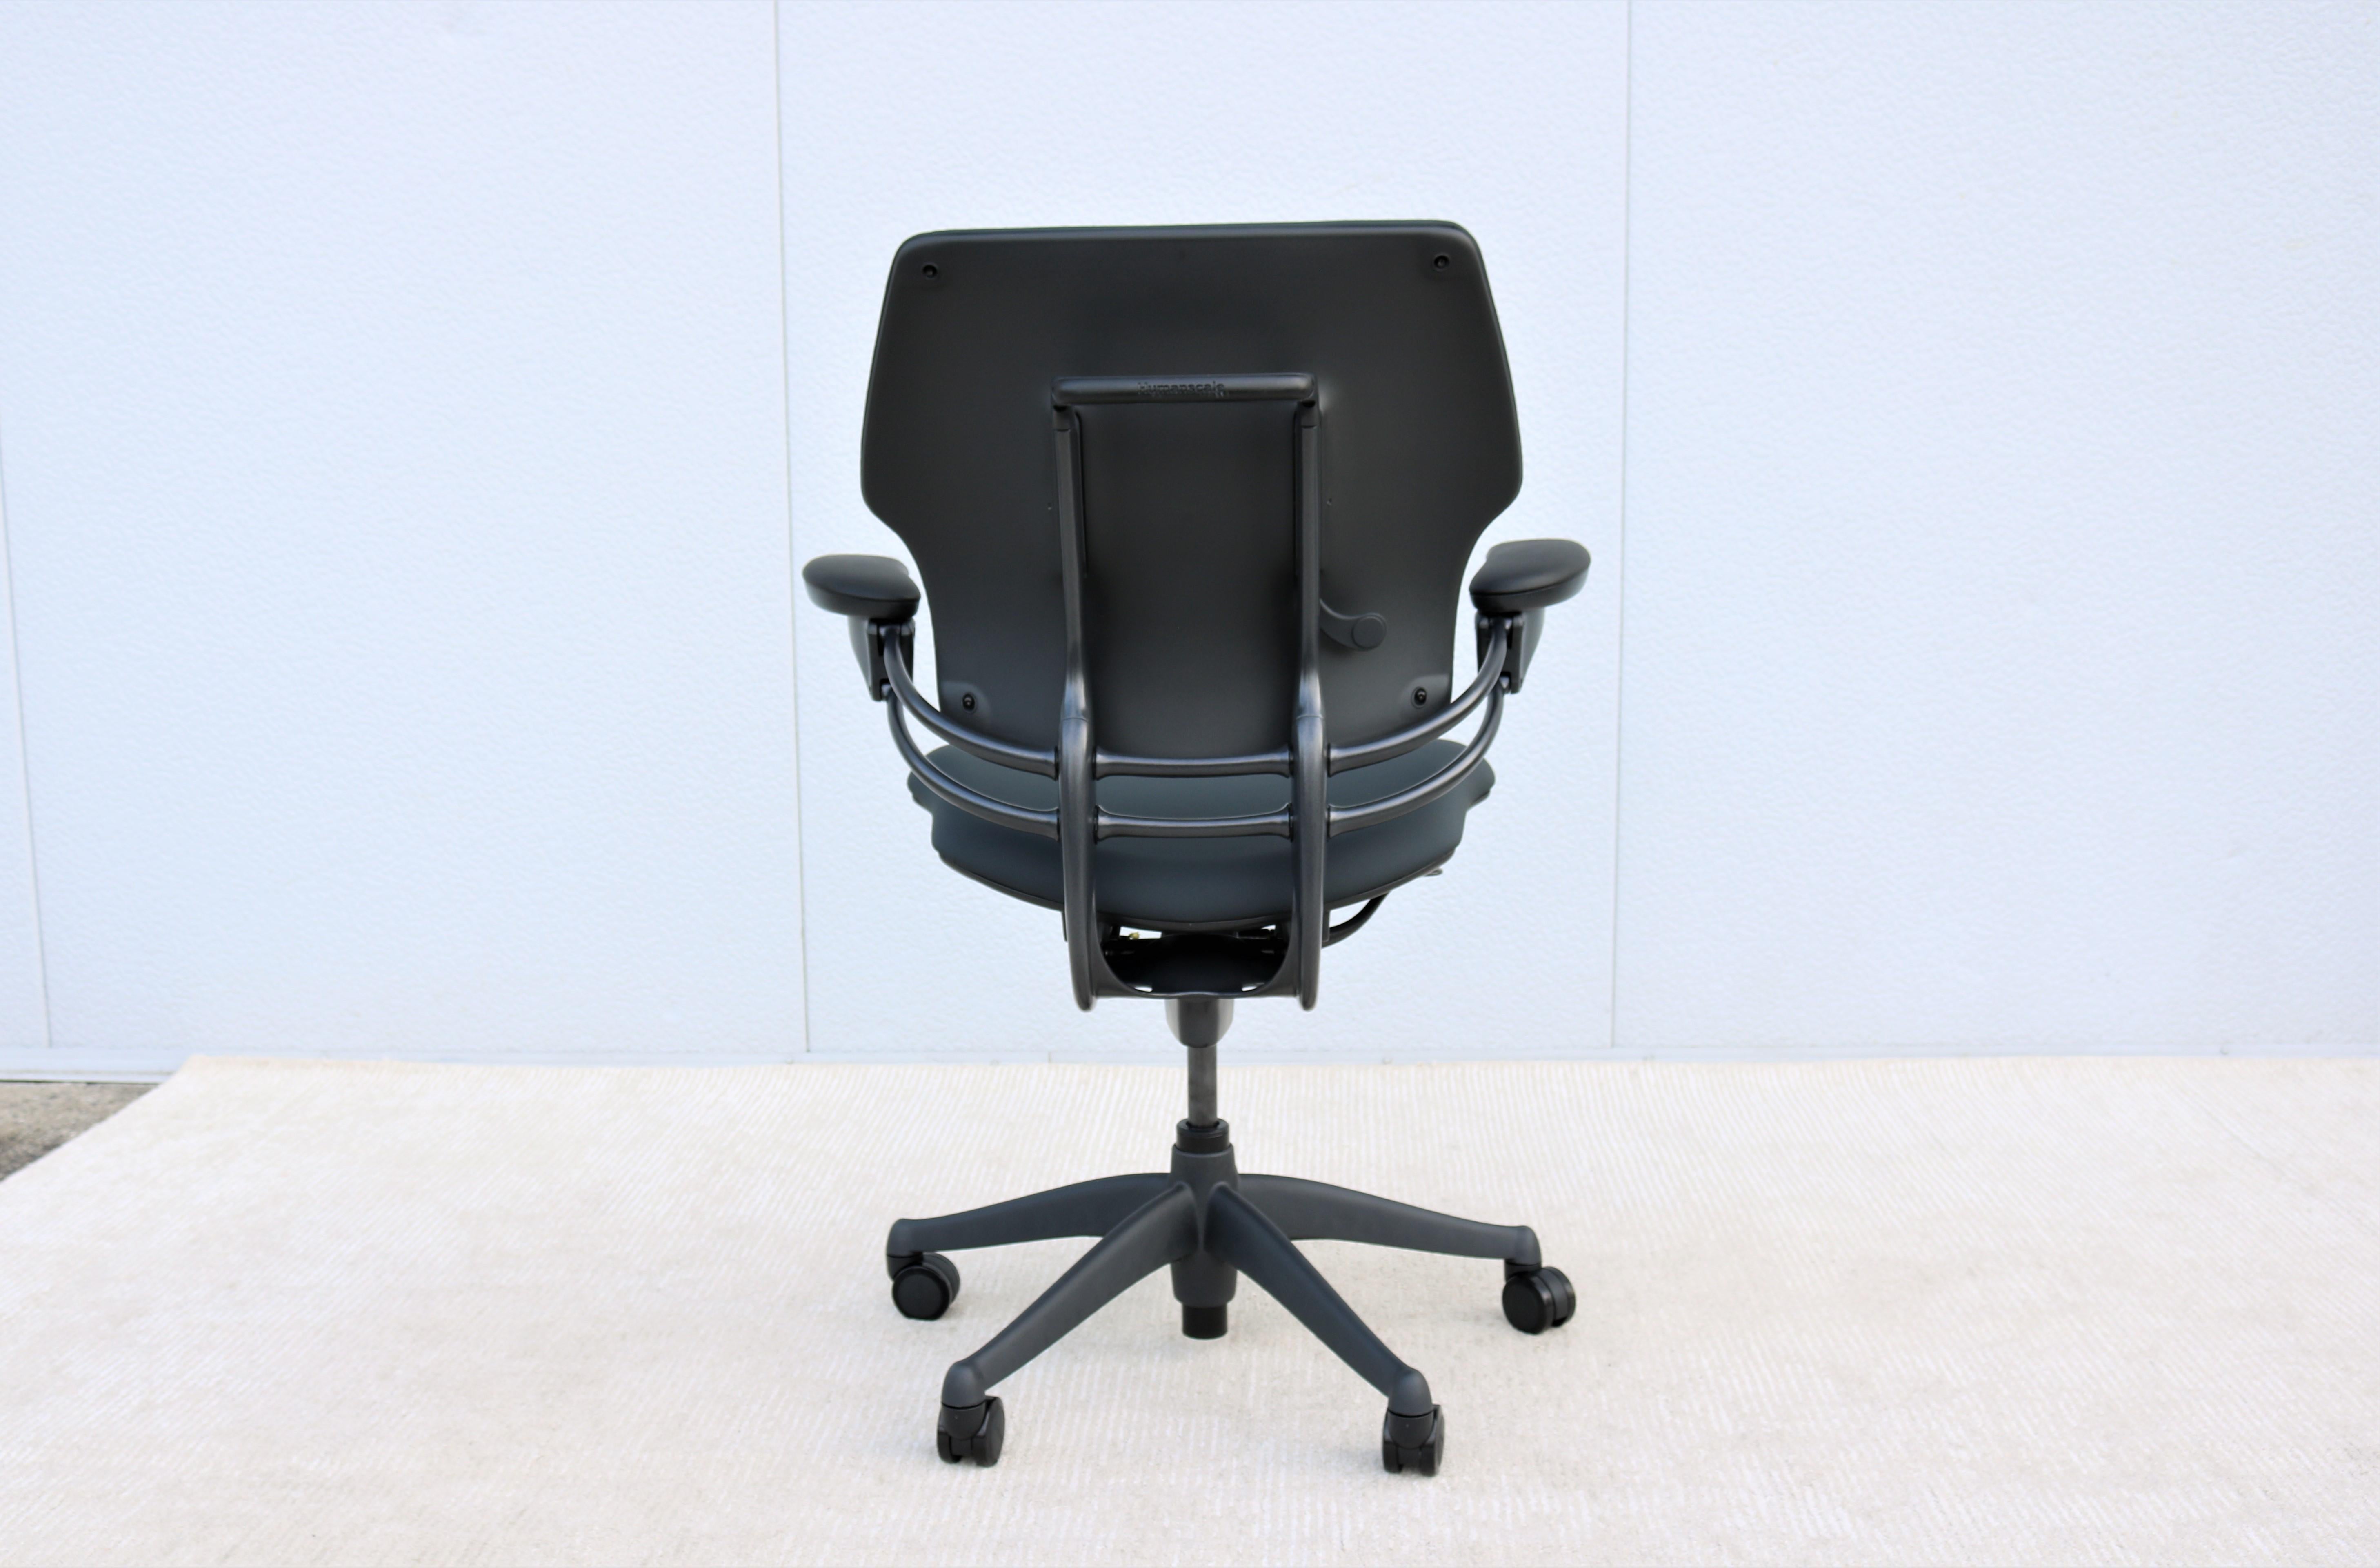 Steel Humanscale Ergonomic Freedom Task Desk Chair Fully Adjustable, Brand New in Box For Sale